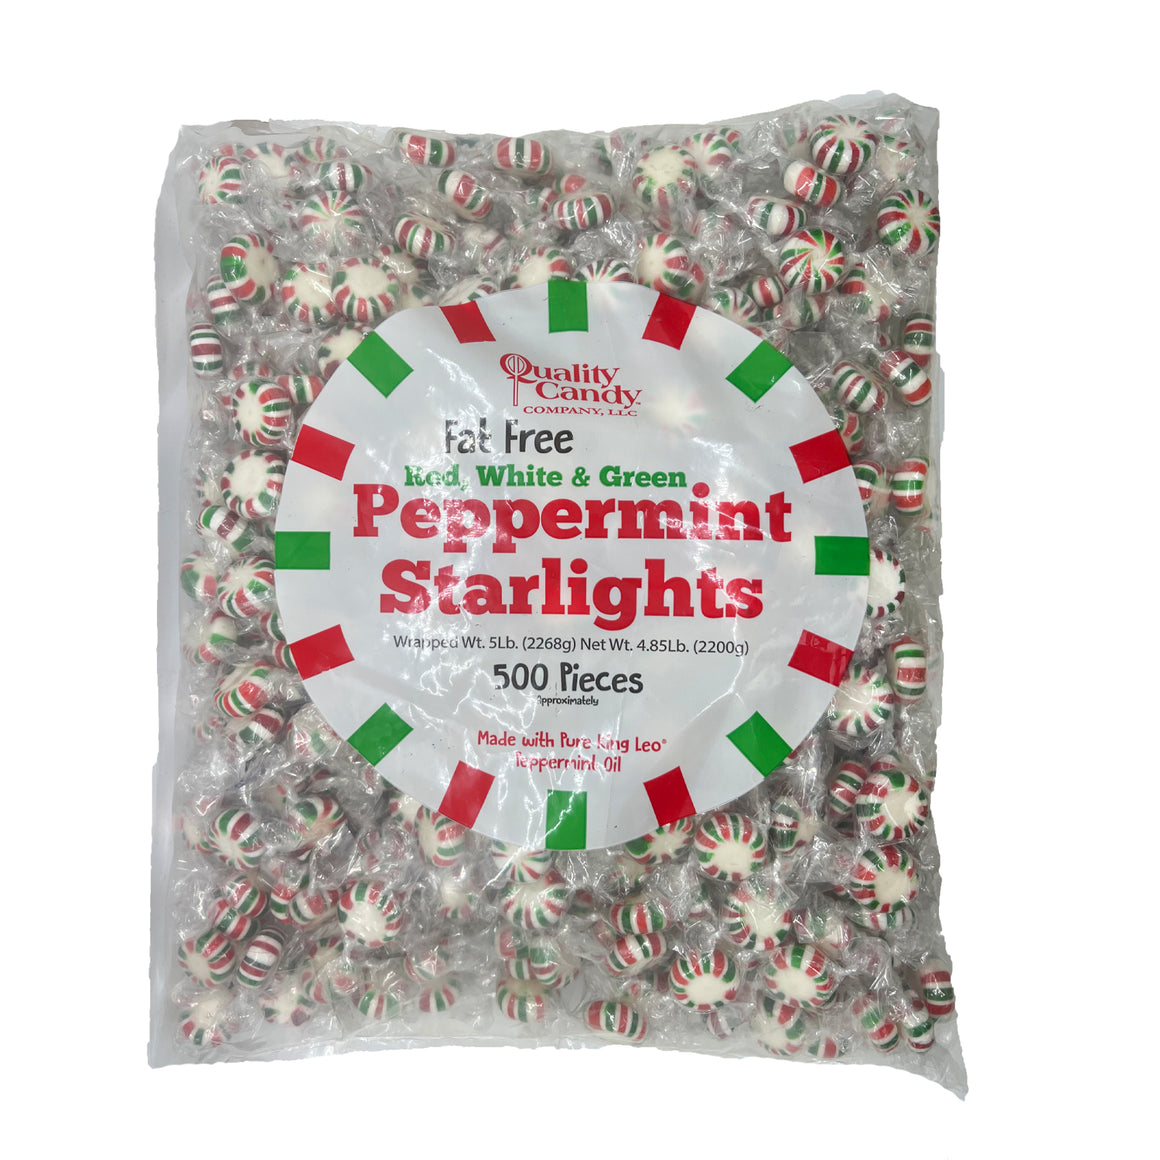 All City Candy Quality Candy Red White and Green Peppermint Starlights Christmas Quality Candy Company For fresh candy and great service, visit www.allcitycandy.com